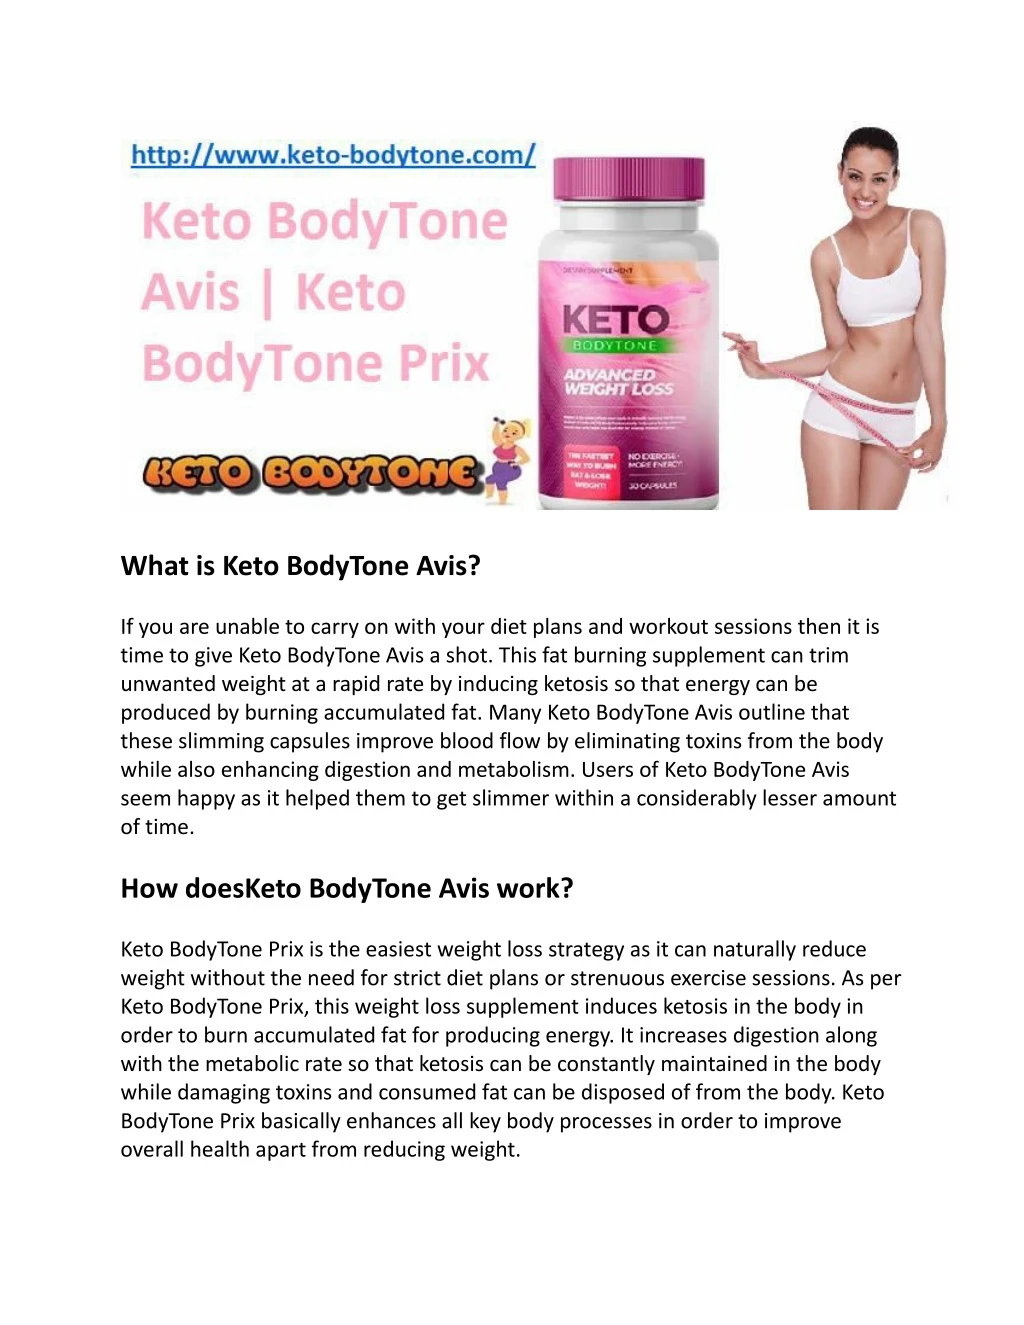 what is keto bodytone avis if you are unable